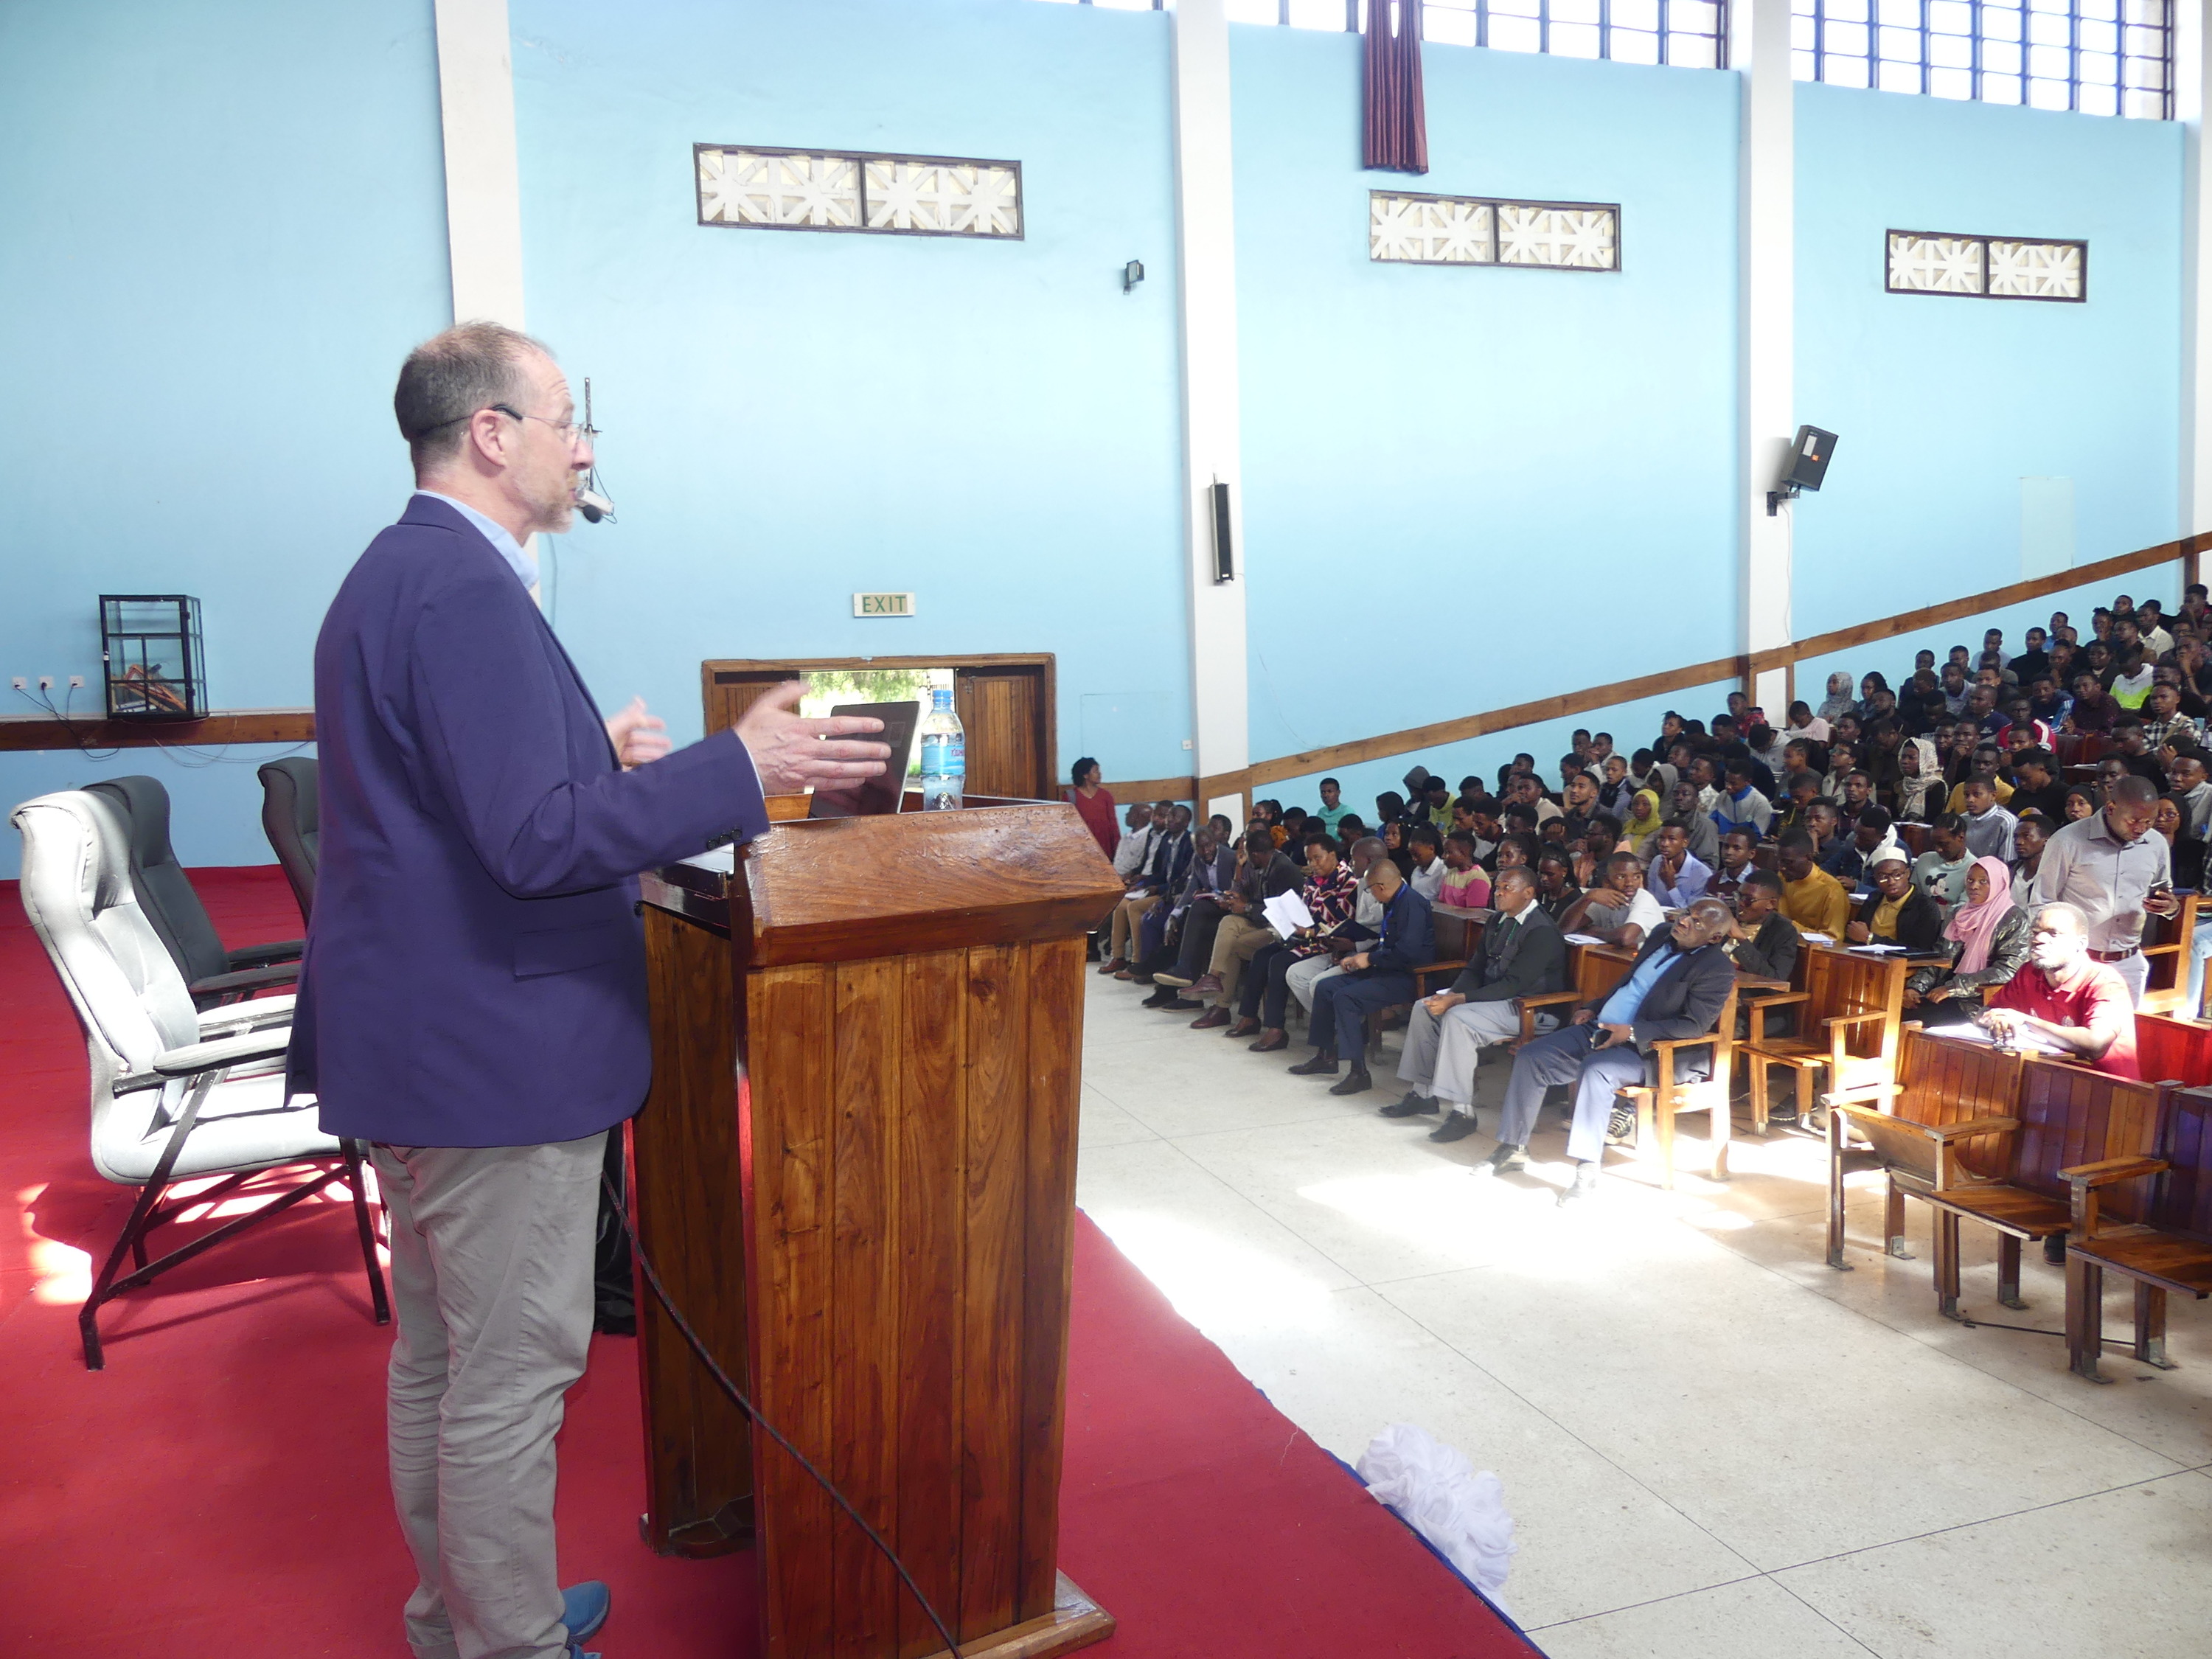 Prof. Gareth Doherty  from Harvard Graduate School of Design giving Public Lecture on Critical Landscape at Nyerere Hall